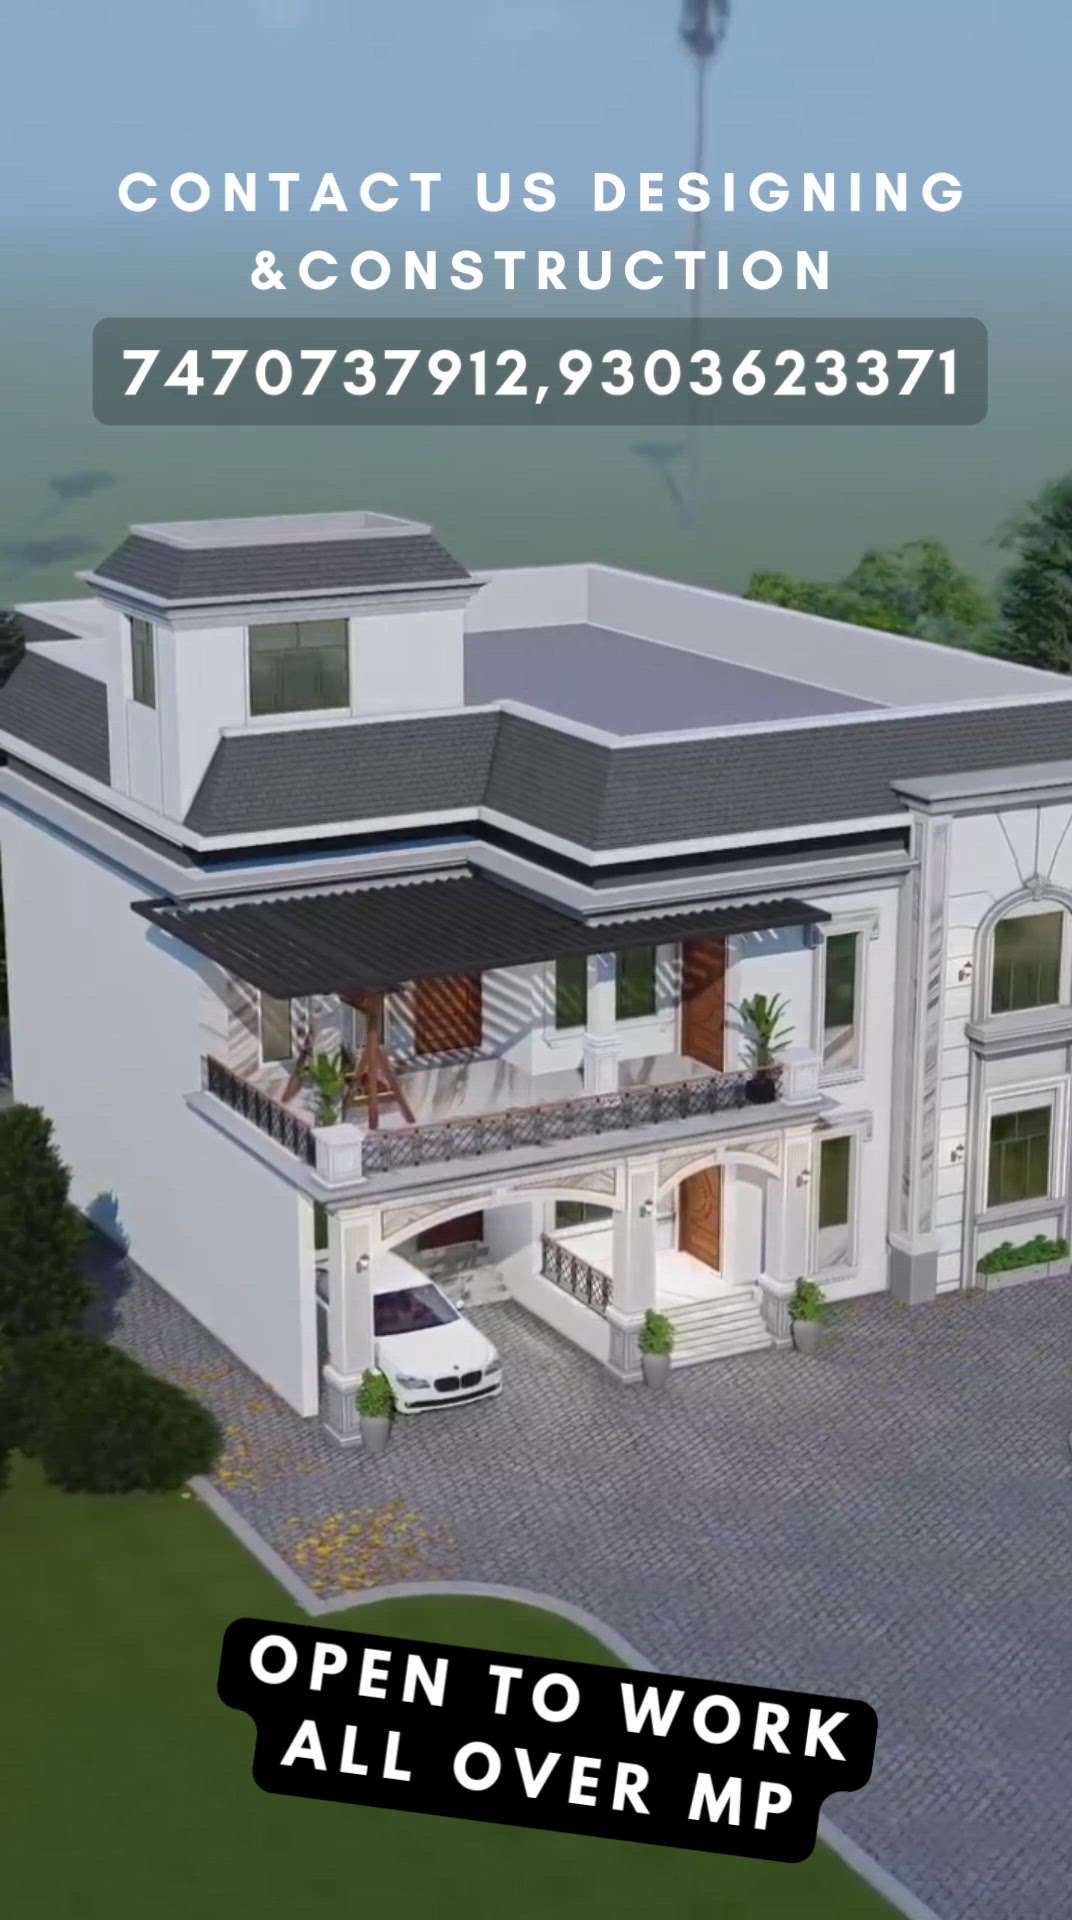 Hello, Guys I'm an architect and I provide Planning, interior design, draughting, 2D & 3D work, Elevation & Renders, construction, false ceiling design and other services. where you get best quality of work and drawings. If you have work for me direct message(DM) me  #ElevationHome  #HouseDesigns  #ContemporaryHouse  #HouseDesigns  #3d  #render3d3d  #views  #architecturedesigns  #CivilEngineer  #houseplanning  #30x60houseplan  #ElevationHome  #homesweethome  #homedecorationideas  #2DPlans #2DoorWardrobe  #3hour3danimationchallenge #3dmodeling